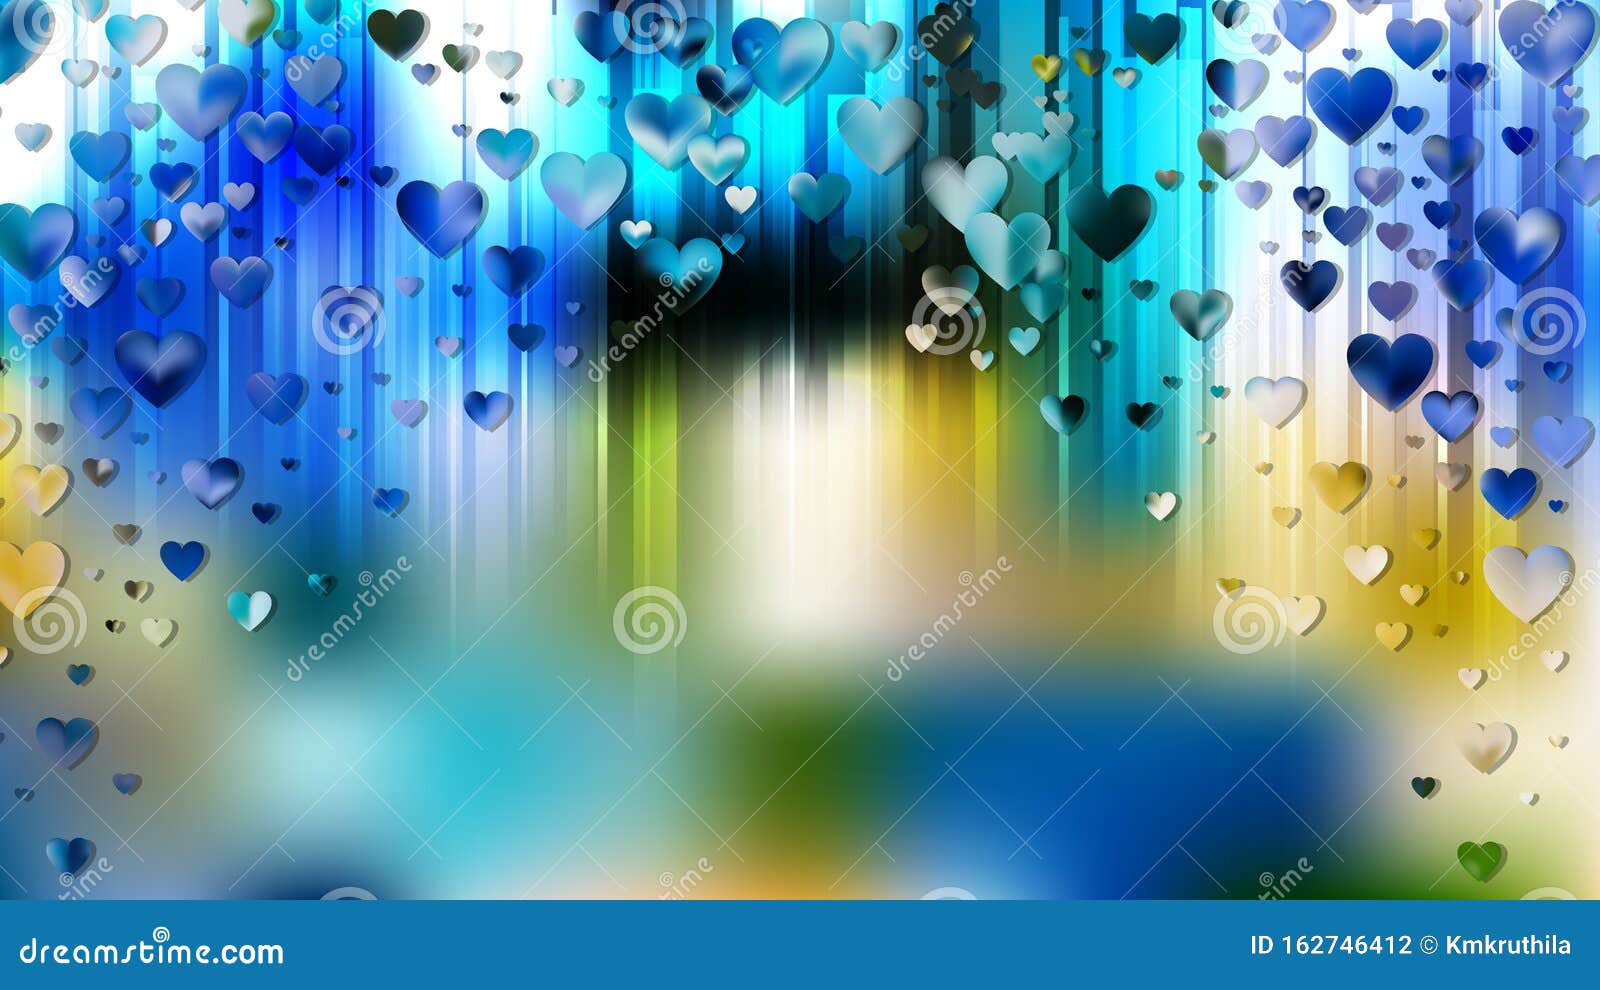 Blue and Yellow Love Background Vector Image Stock Vector - Illustration of  happy, abstract: 162746412